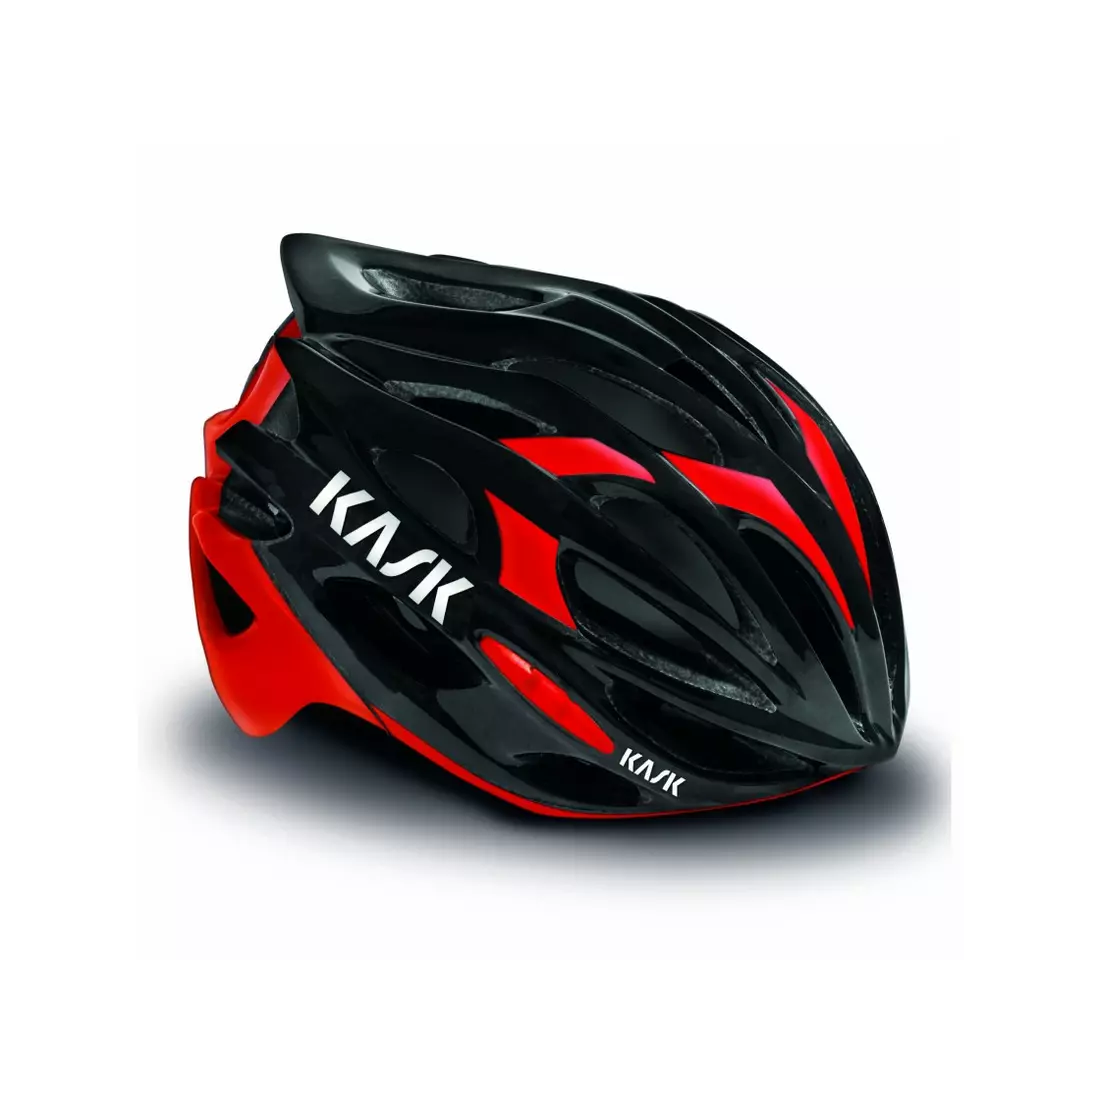 MOJITO HELMET - bicycle helmet CHE00044.226 color: black and red